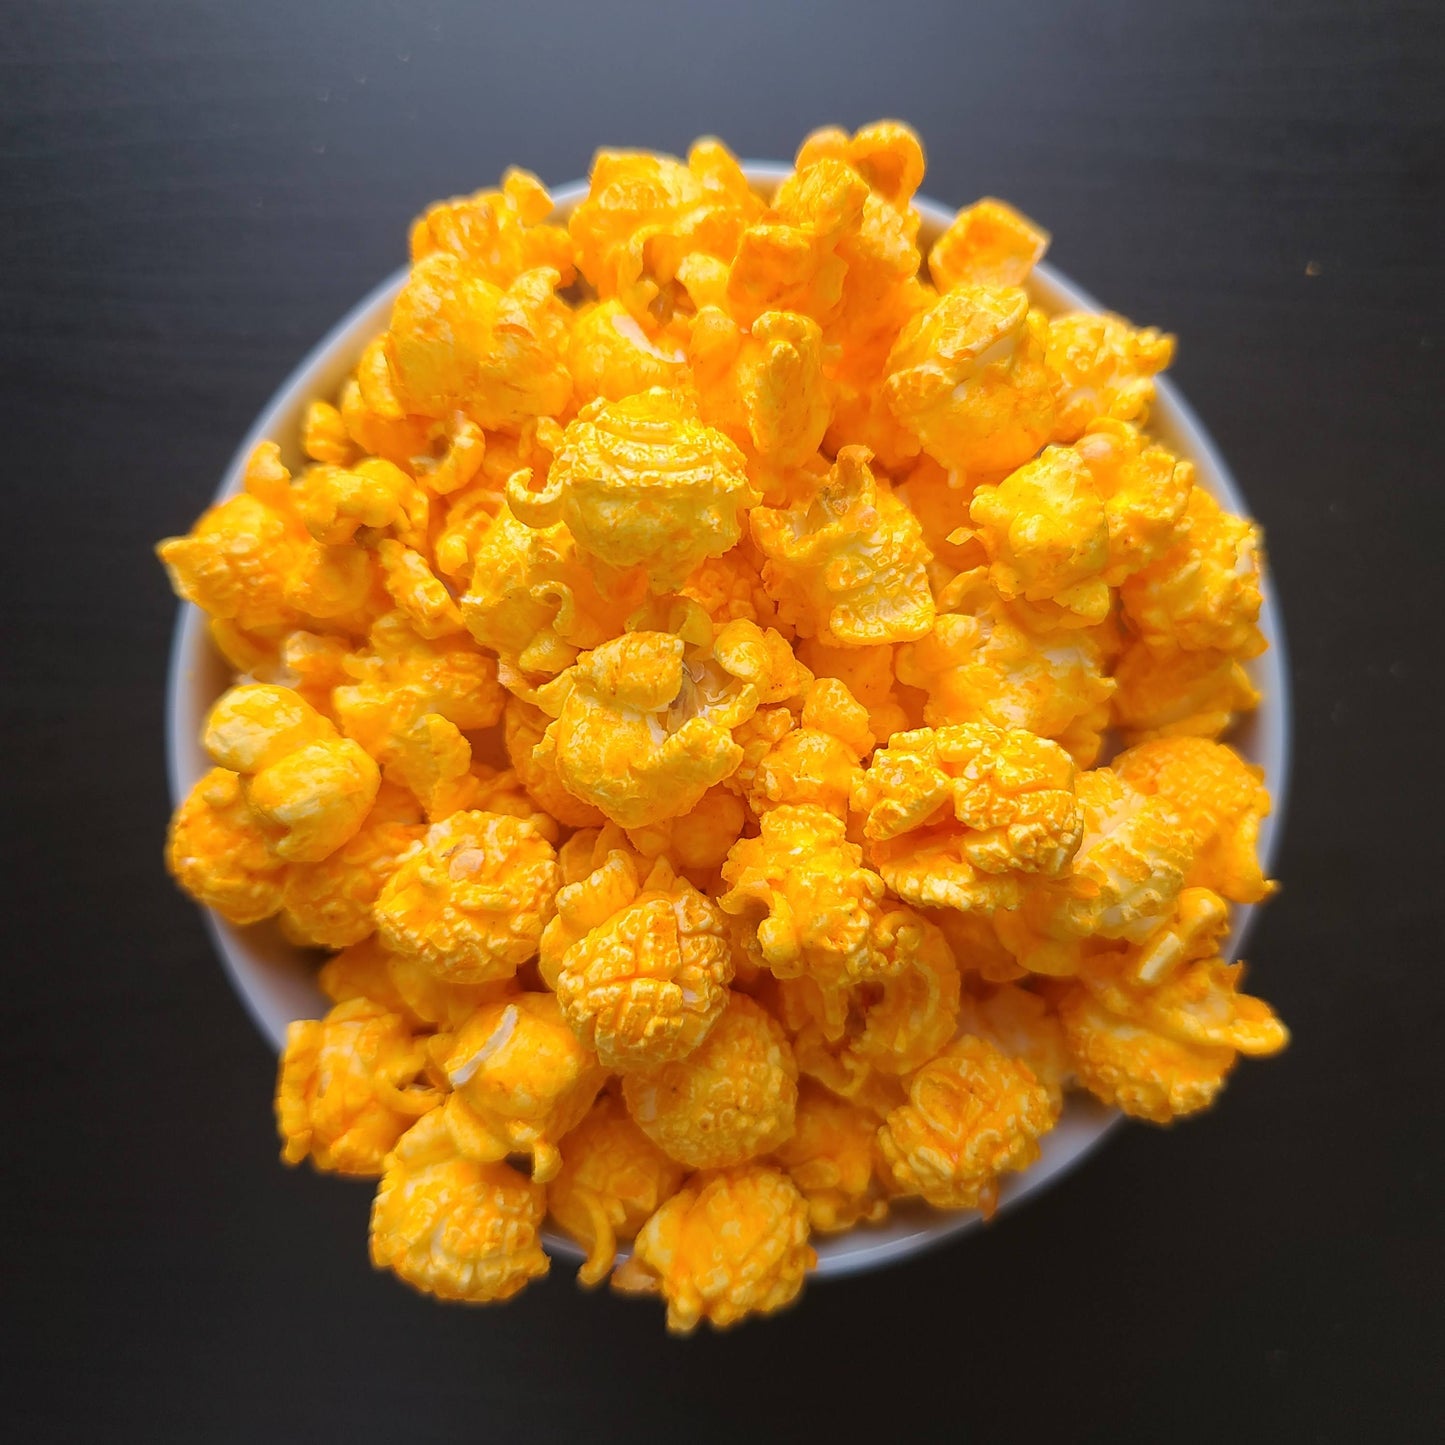 Child and Family Charities - Cravings Gourmet Popcorn